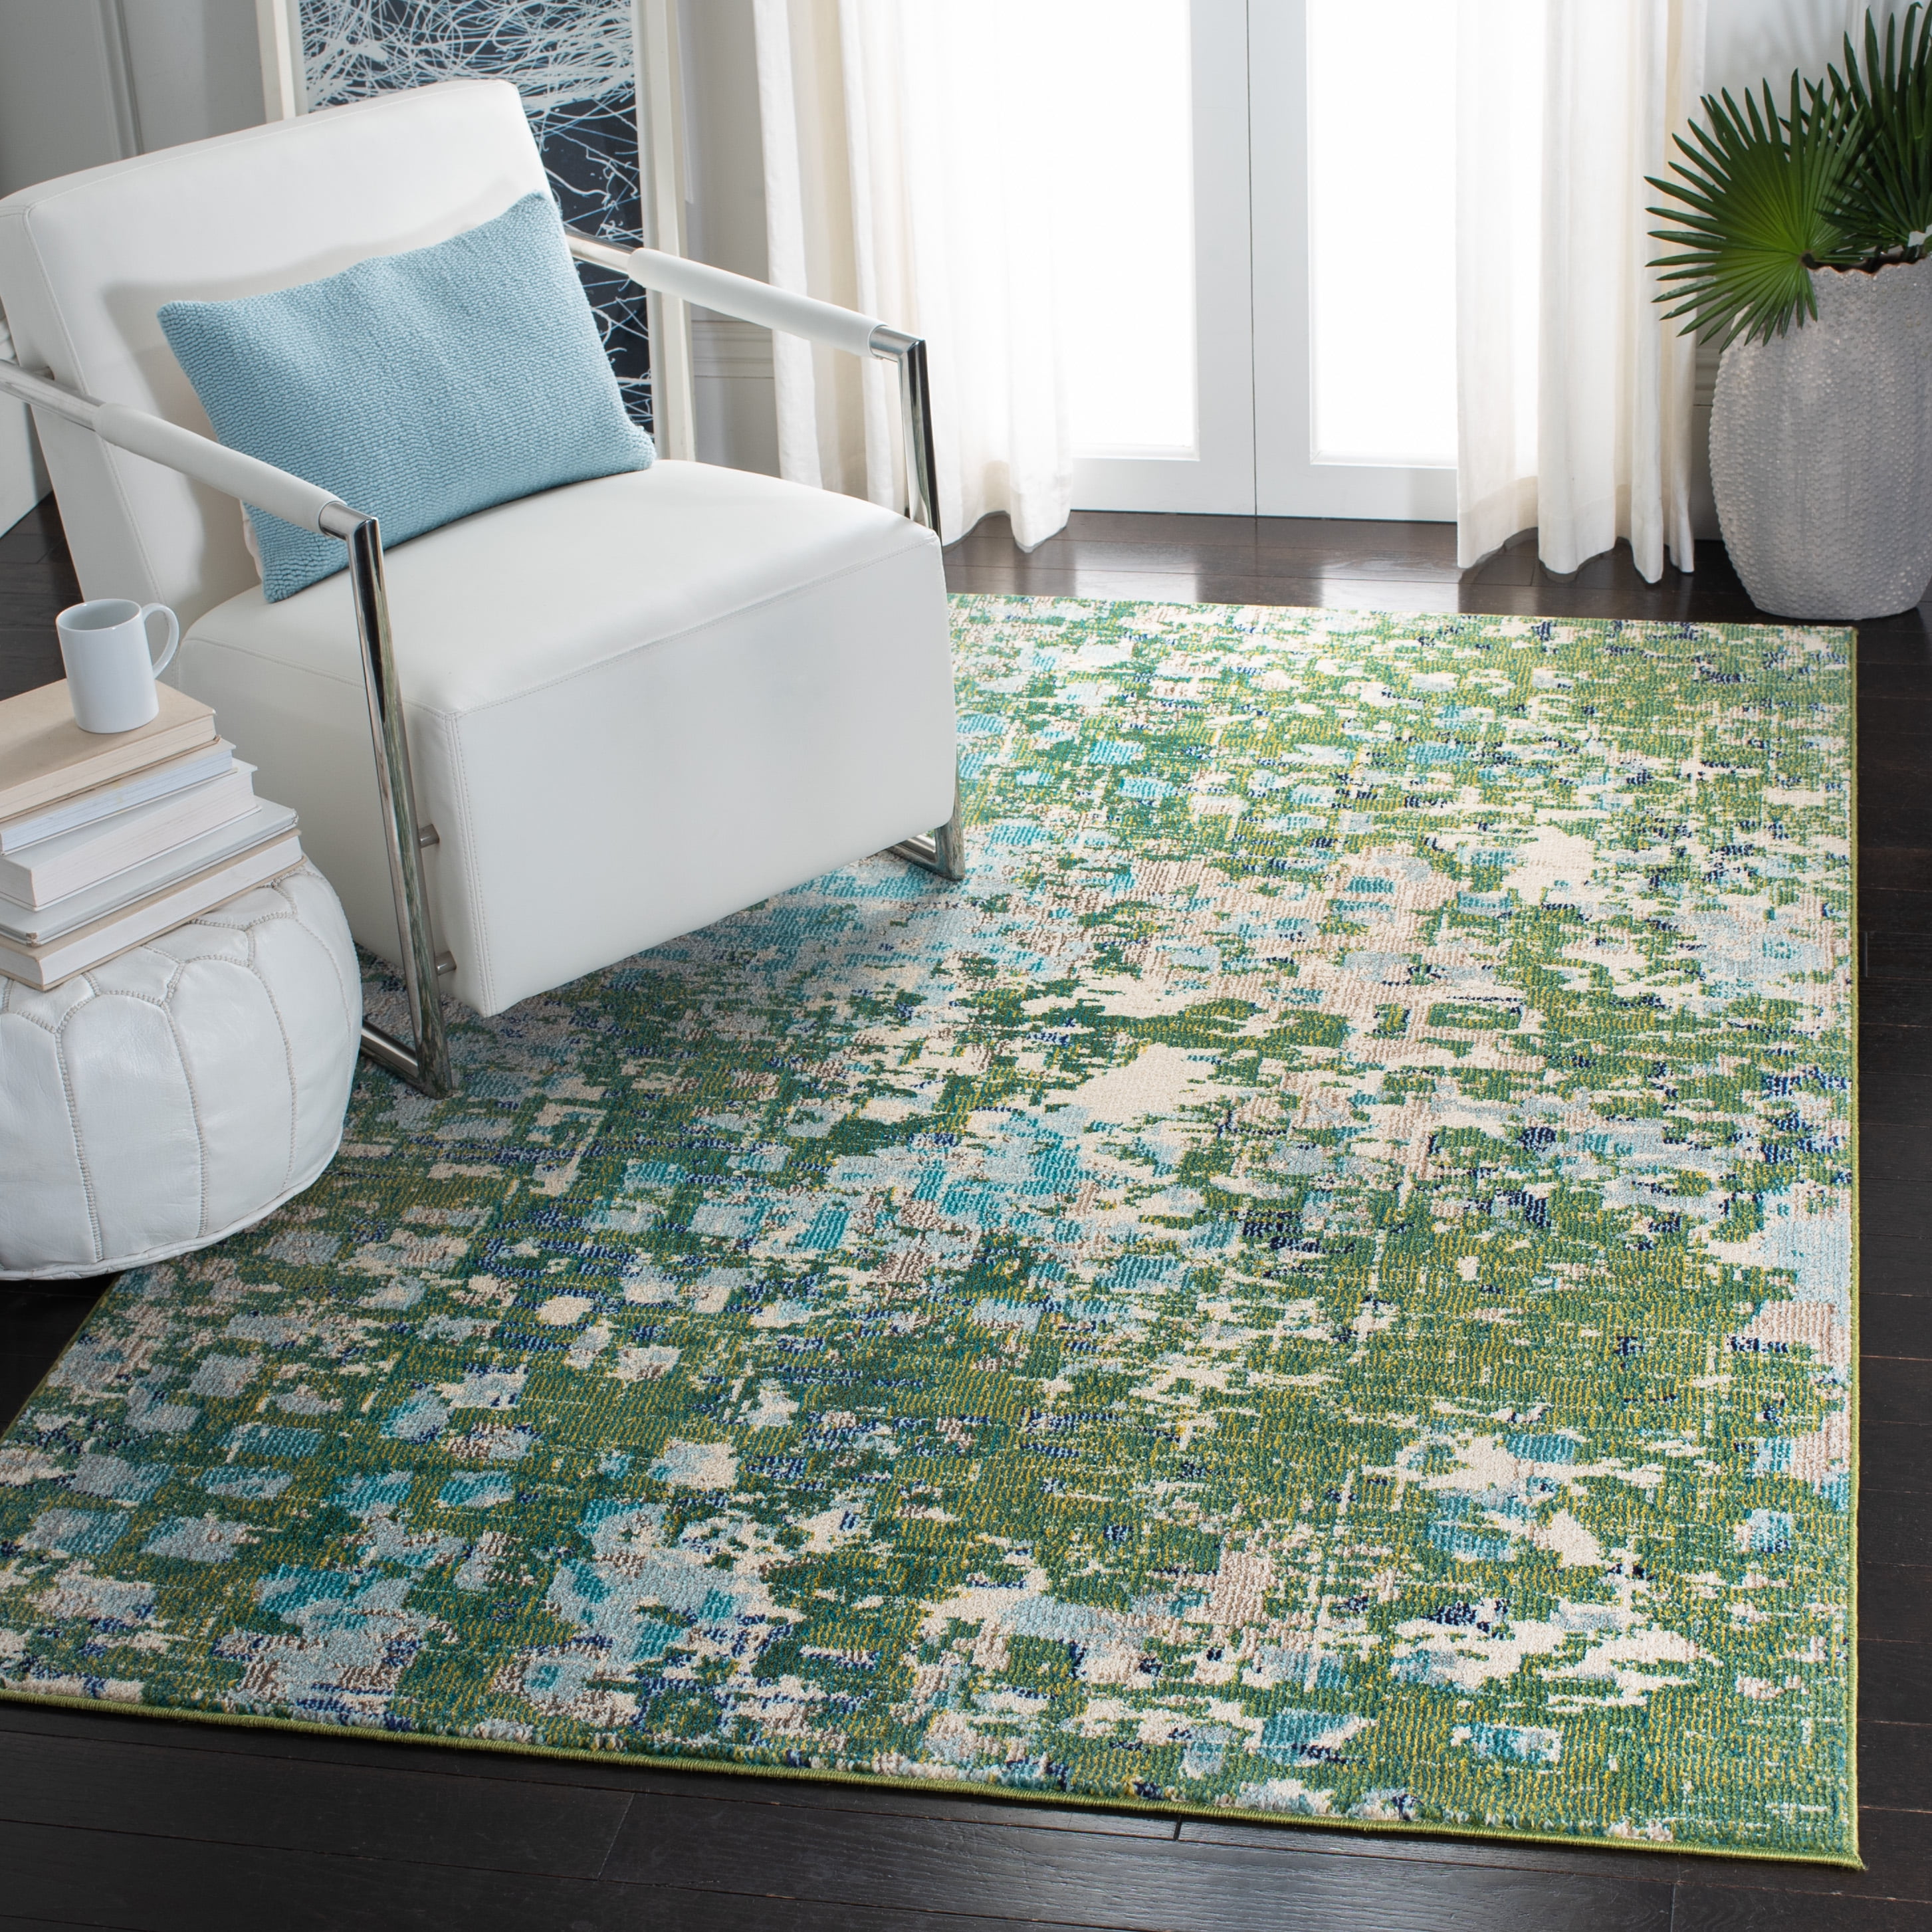 SAFAVIEH Madison Candelario Abstract Polka Dots Area Rug, Green/Turquoise, 5'3" x 7'6" - image 3 of 8